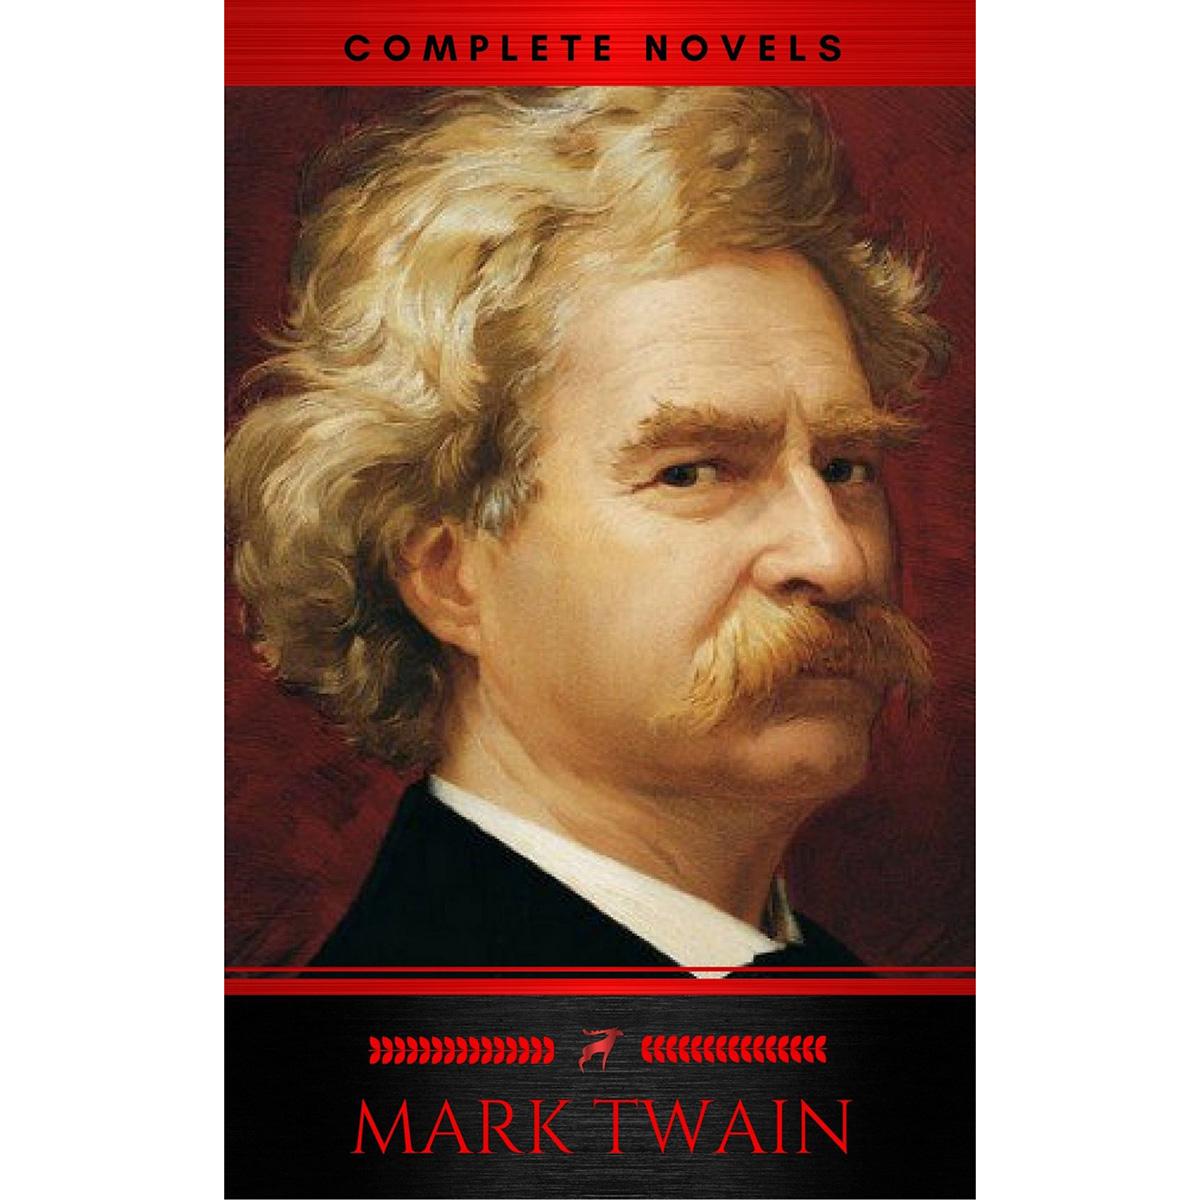 Mark Twain The Complete Novels Audiobook for $0.99